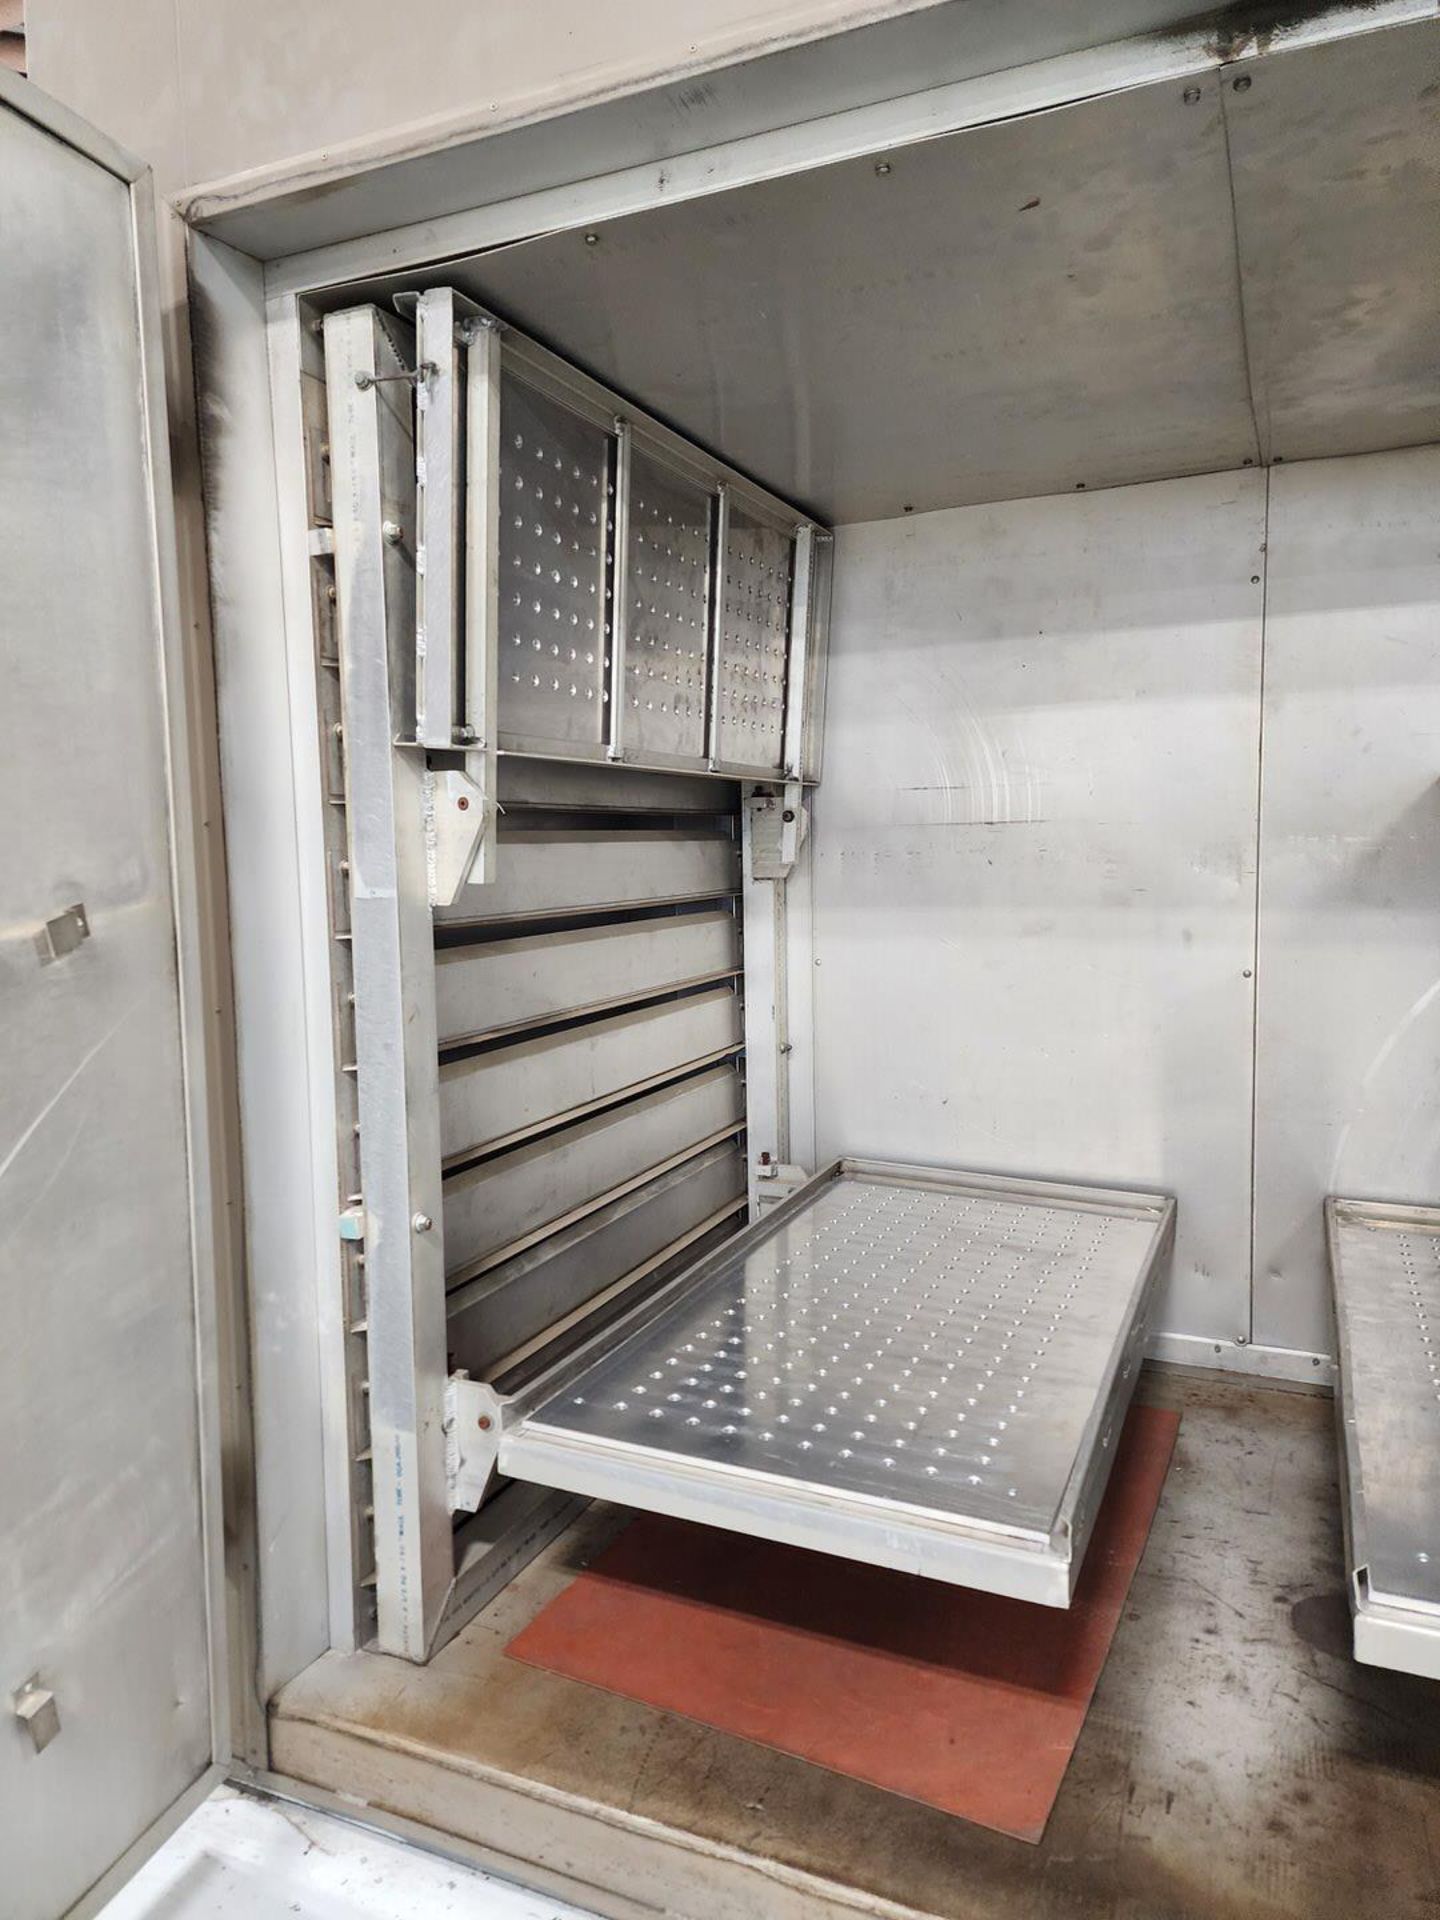 Koch HBE-645 Batch Oven Max Temp: 500F, Size: 6' x 4' x 5' (Asset# 116059 - Image 10 of 11